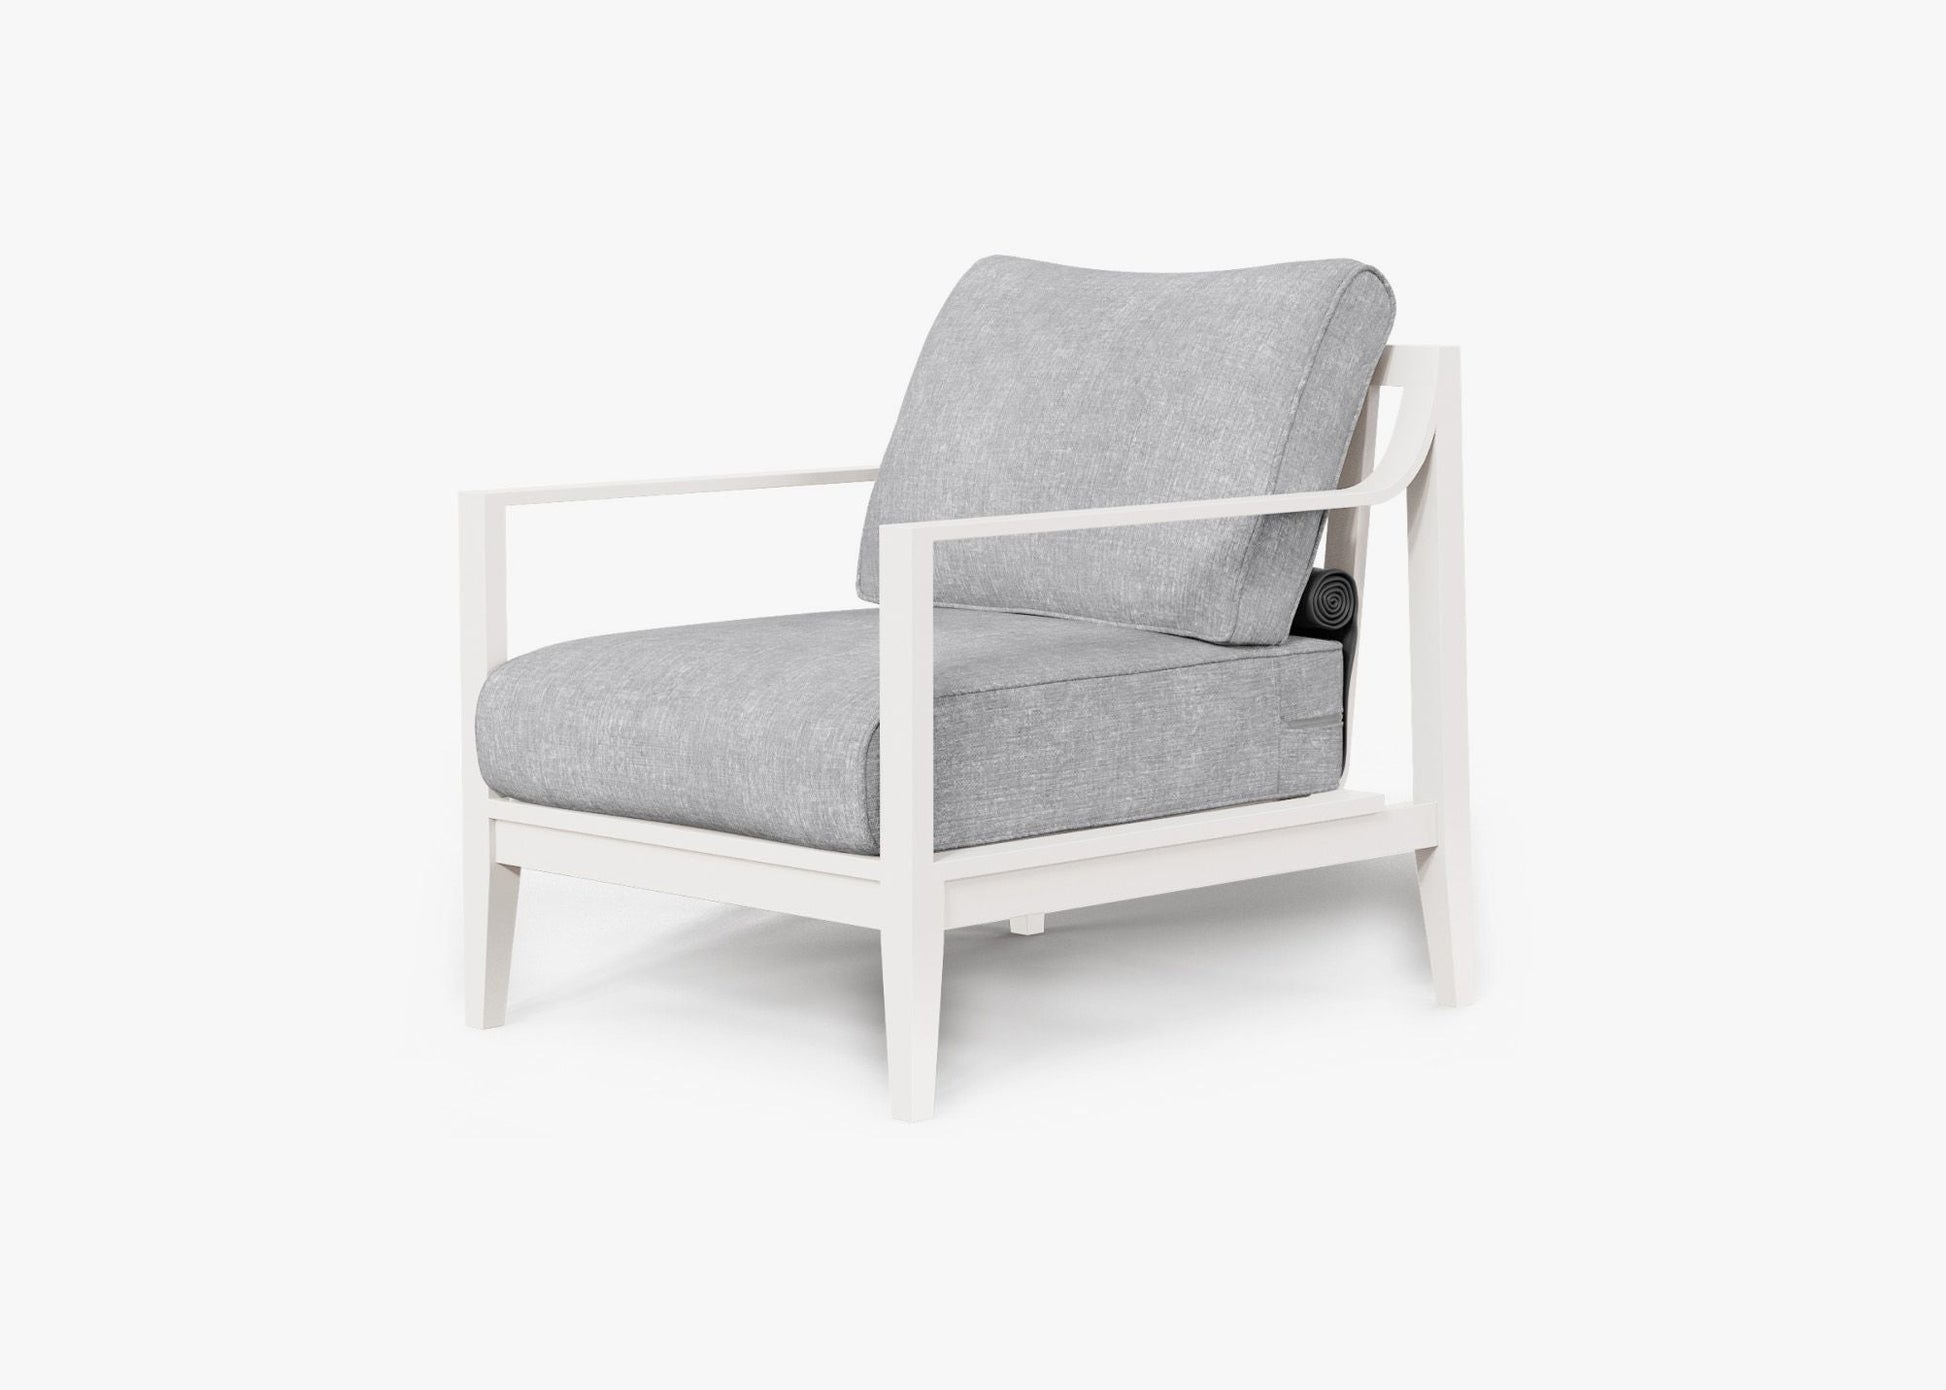 Live Outer 27" White Aluminum Outdoor Armchair With Pacific Fog Gray Cushion